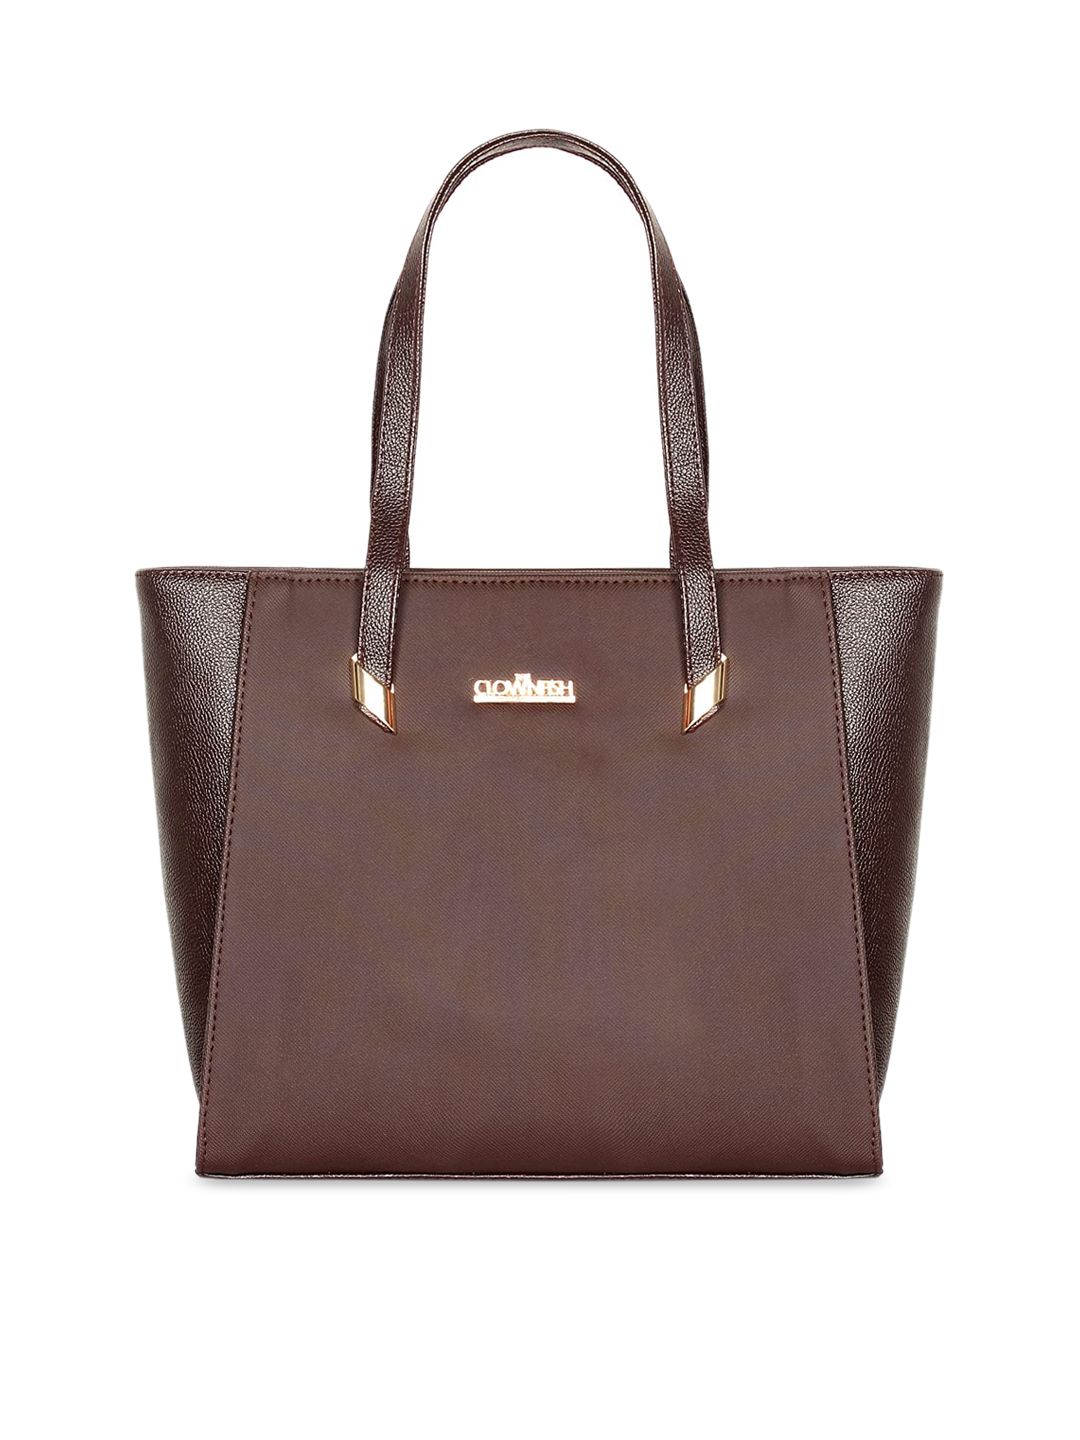 THE CLOWNFISH Coffee Brown Textured Leather Handheld Bag Price in India